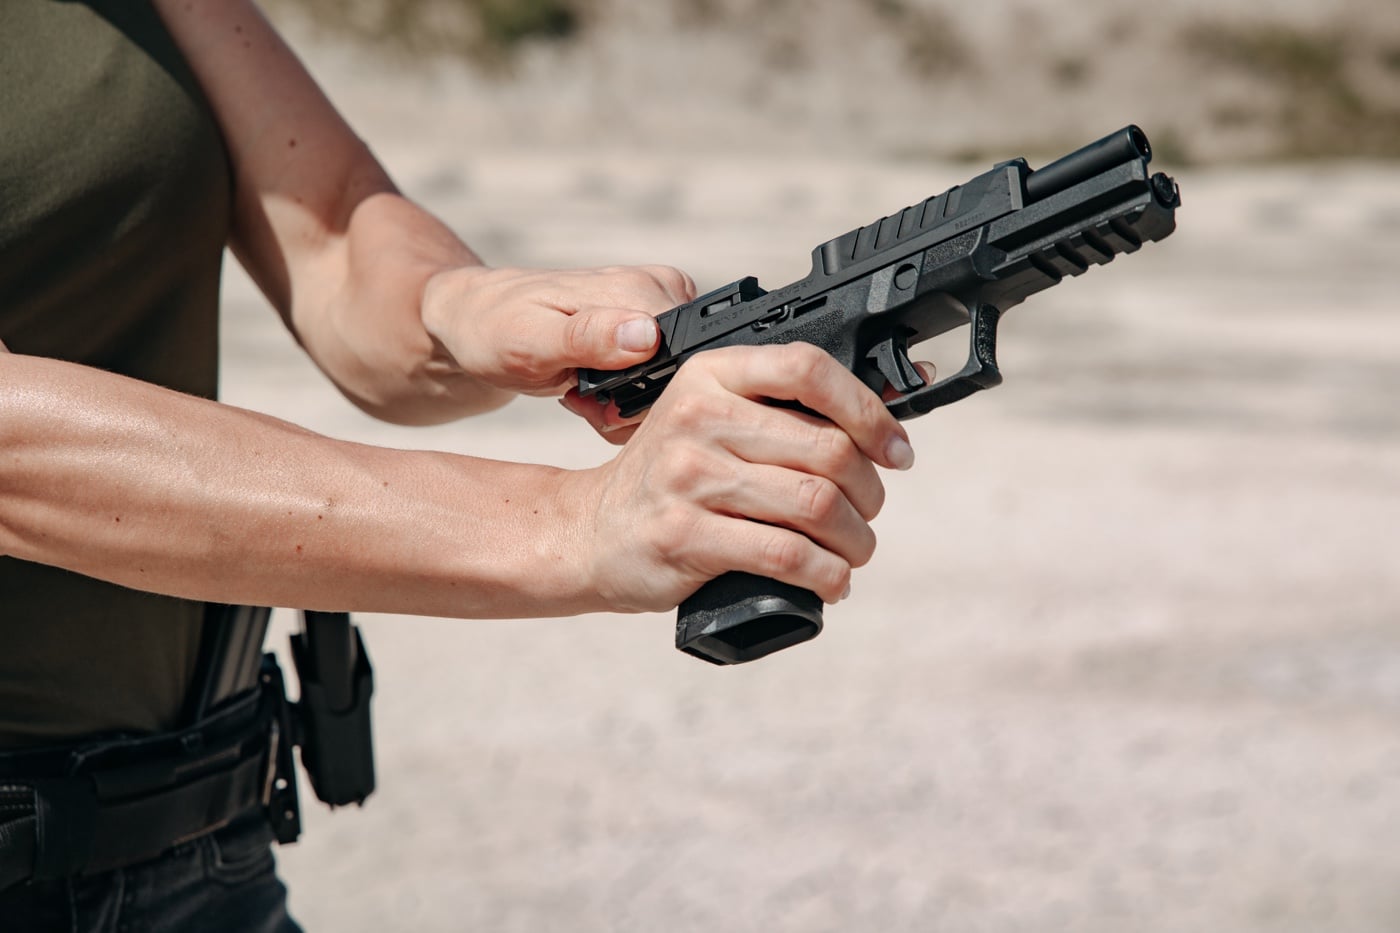 In this digital image, we see a shooter operating the pistol slide using the slingshot or pinch method.